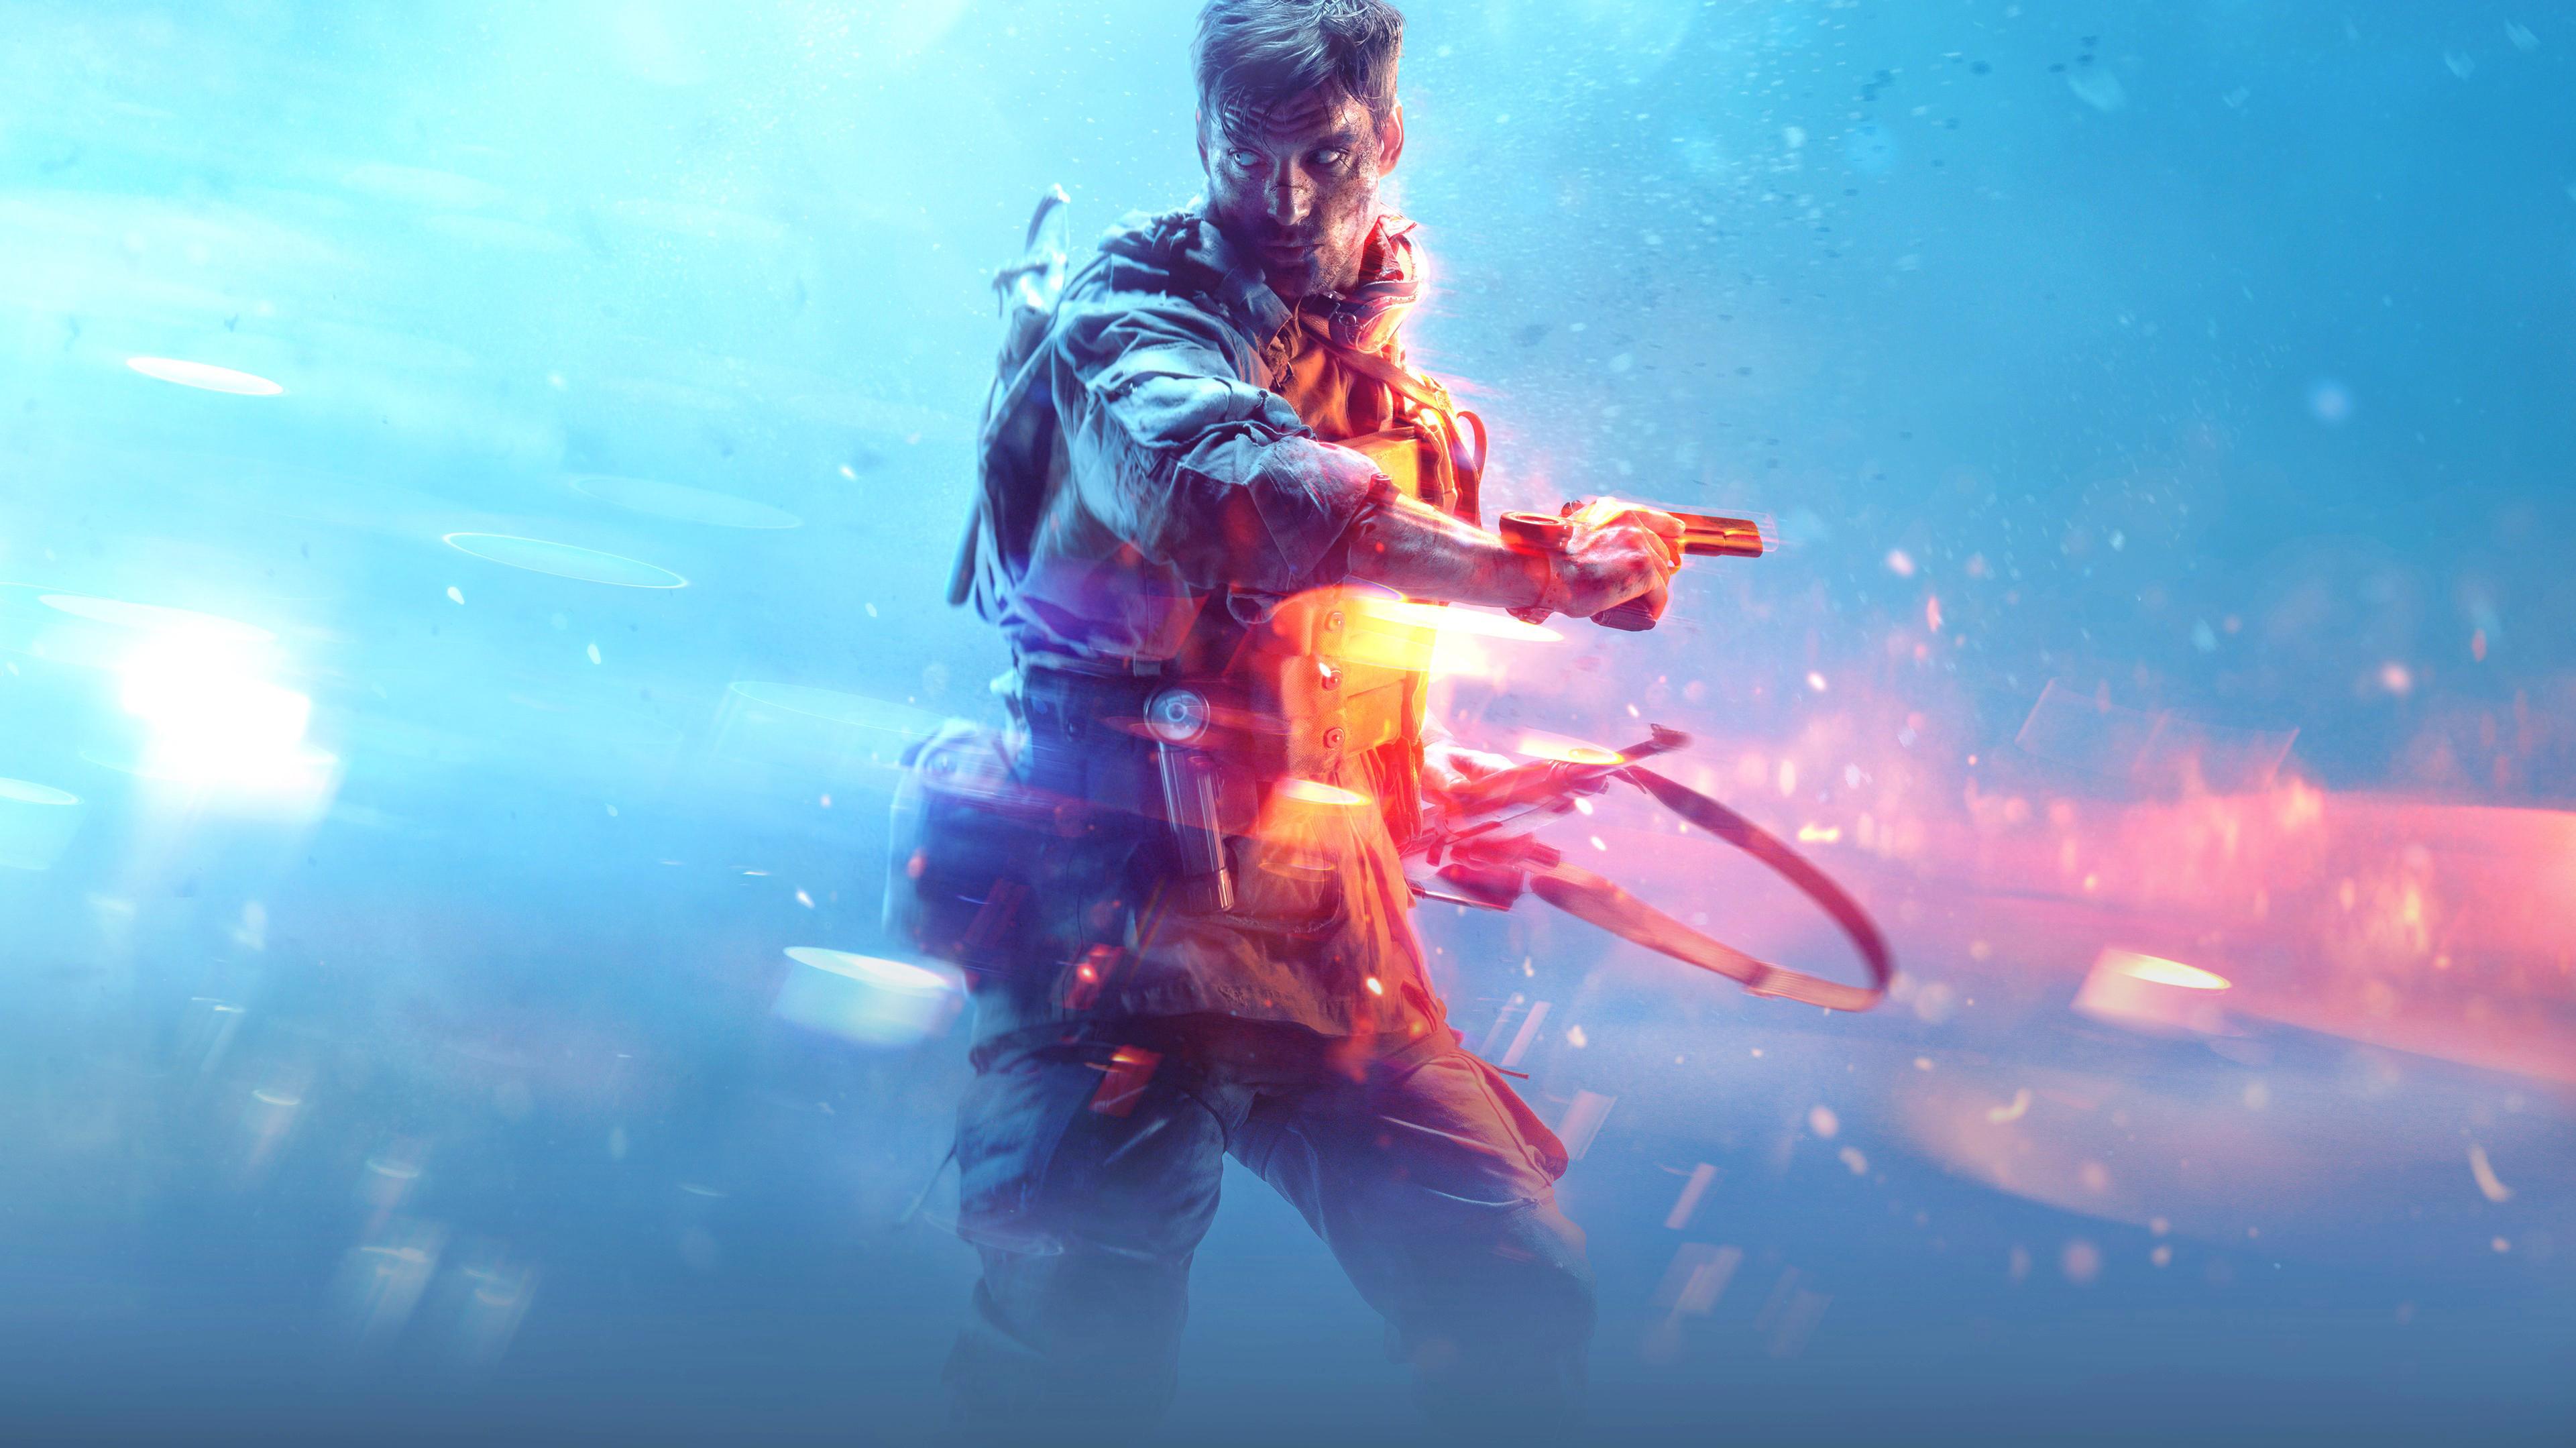  Battlefield V HD Wallpapers and Backgrounds